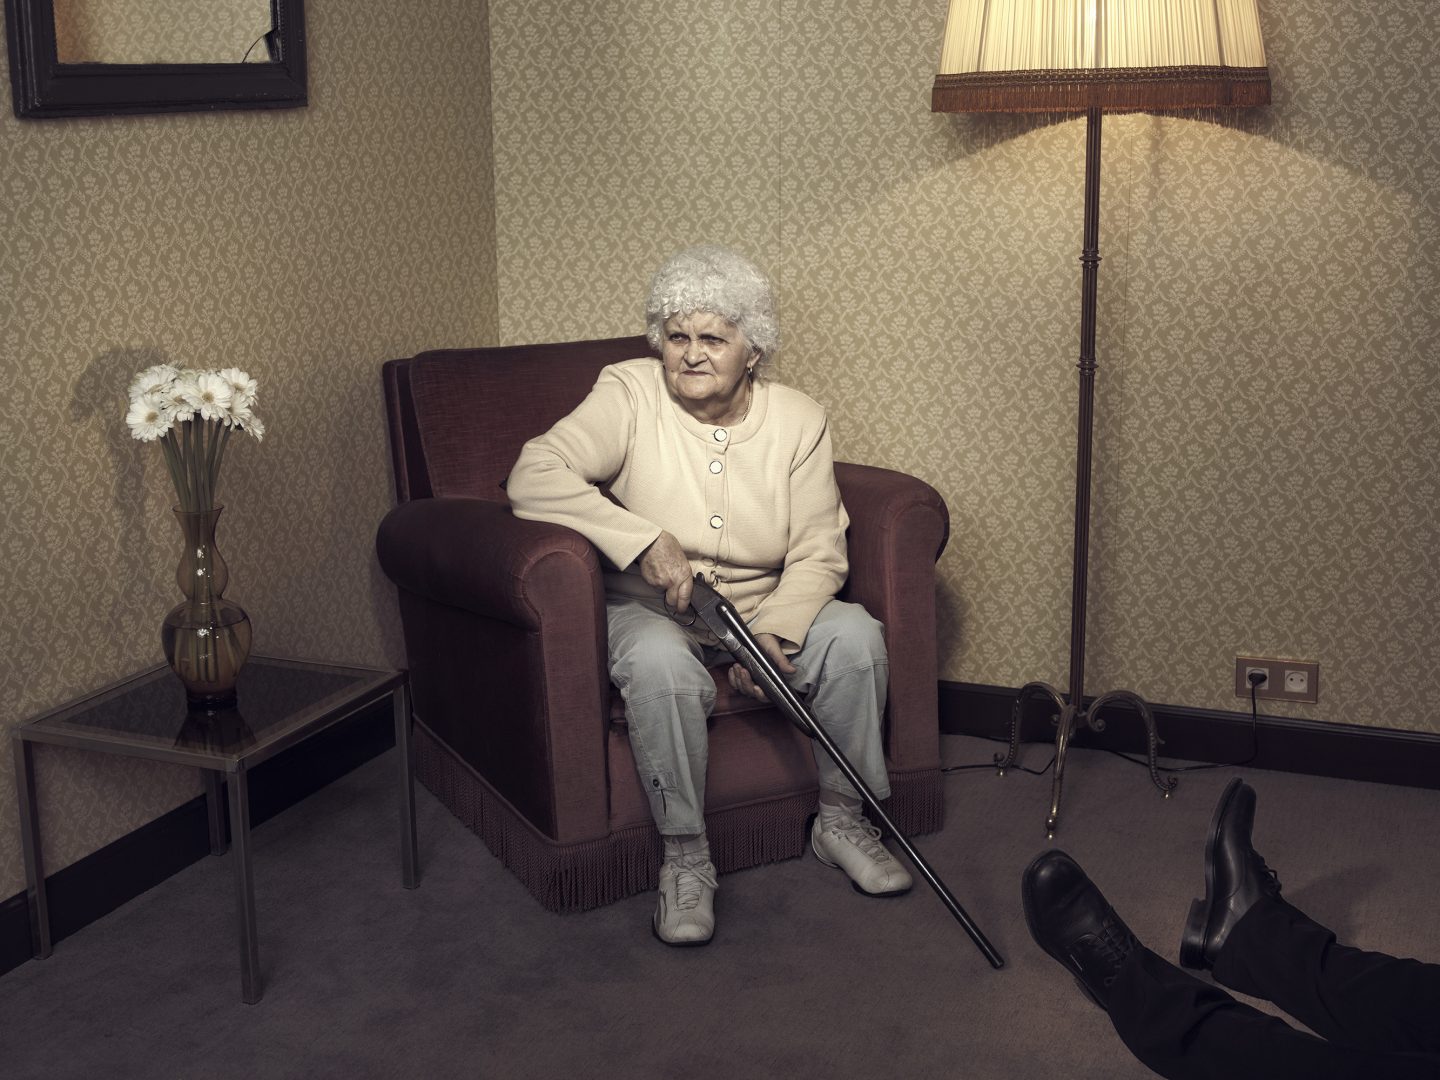 Old lady sitting in chair with gun in room 42 by Stefan Rappo